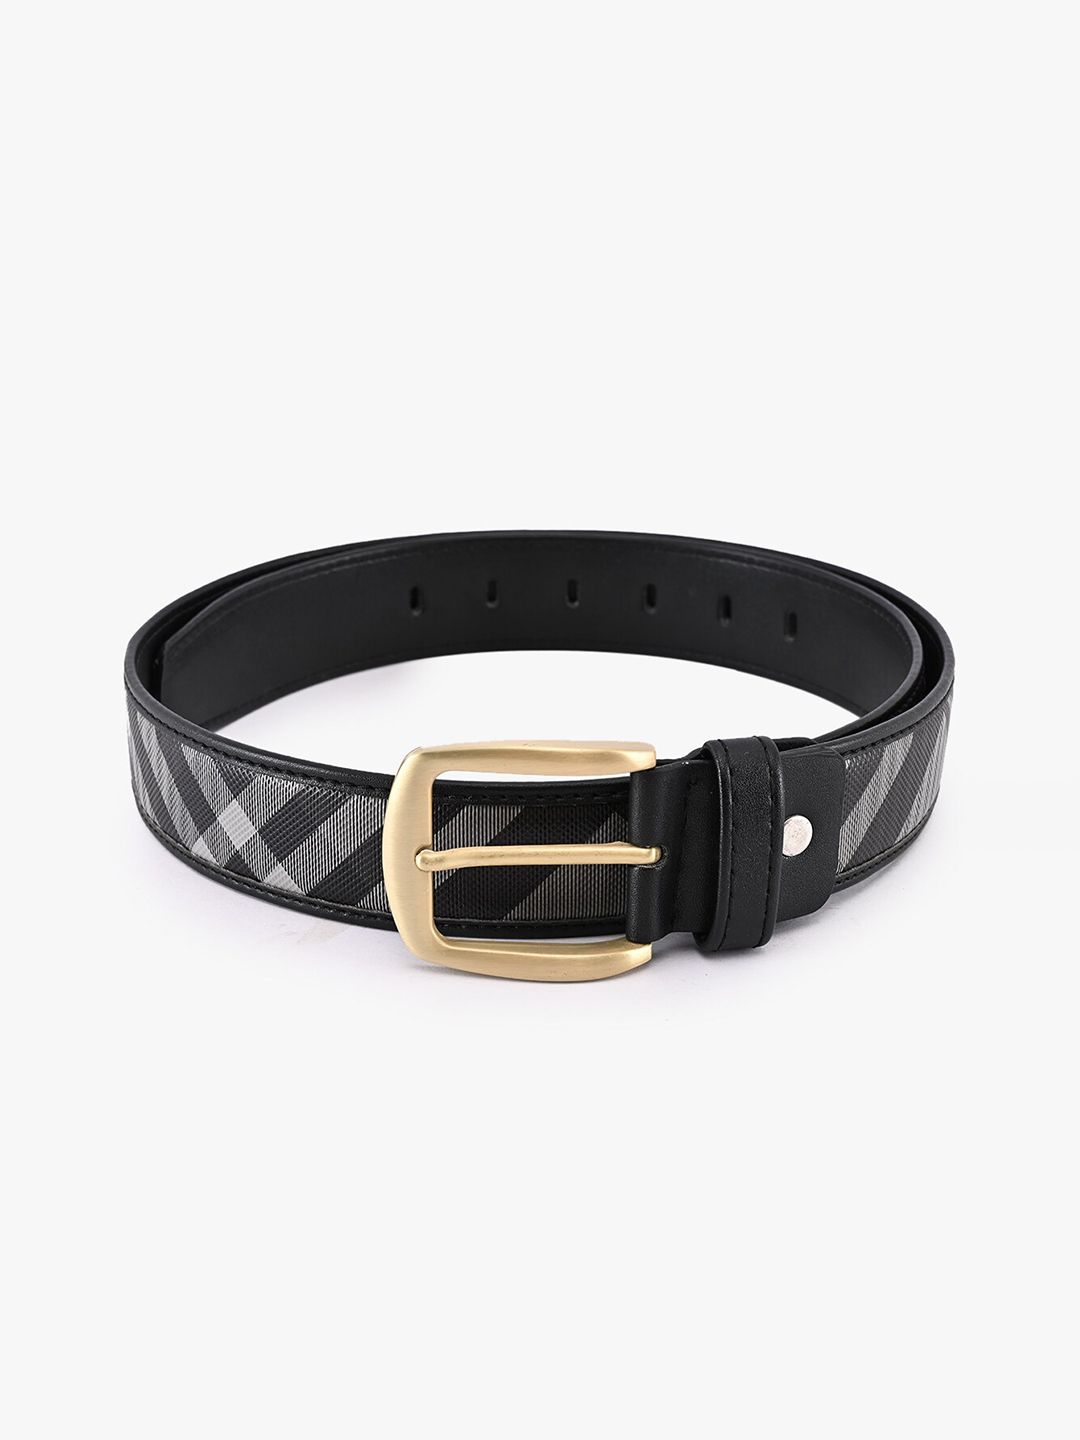 BuckleUp Unisex Black Checked Synthetic Leather Belt Price in India